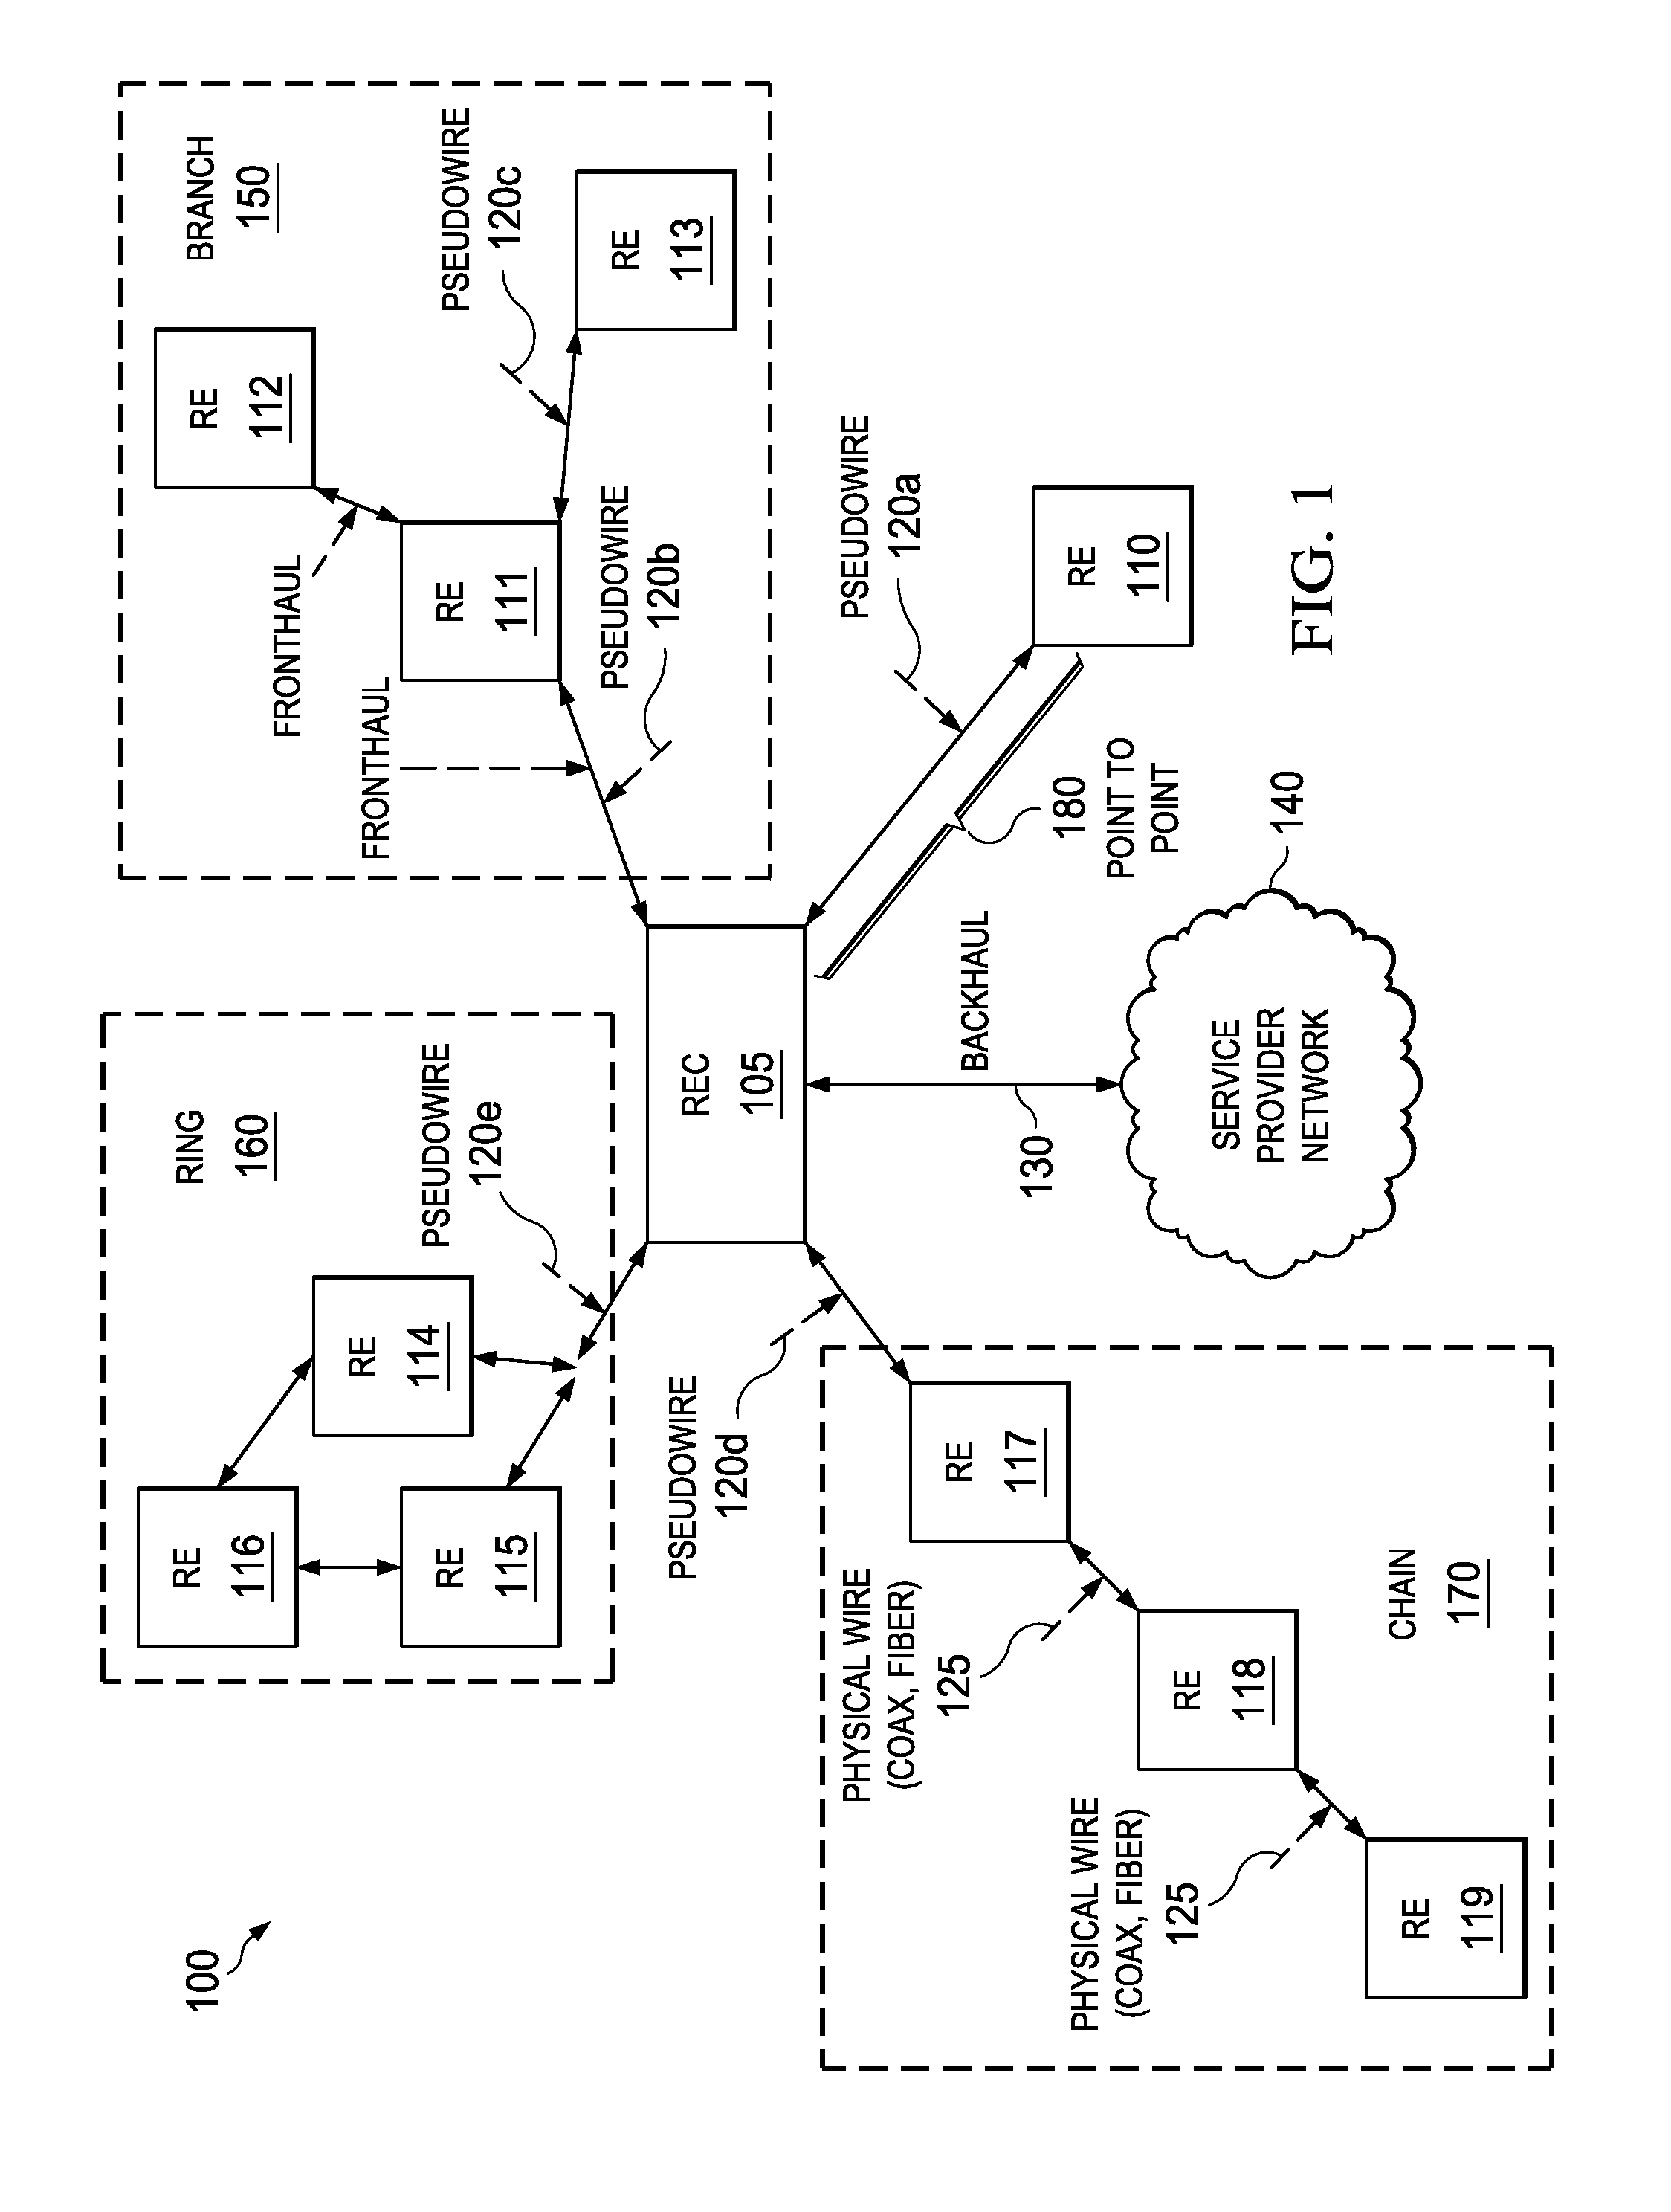 System and method for transporting digital baseband streams in a network environment